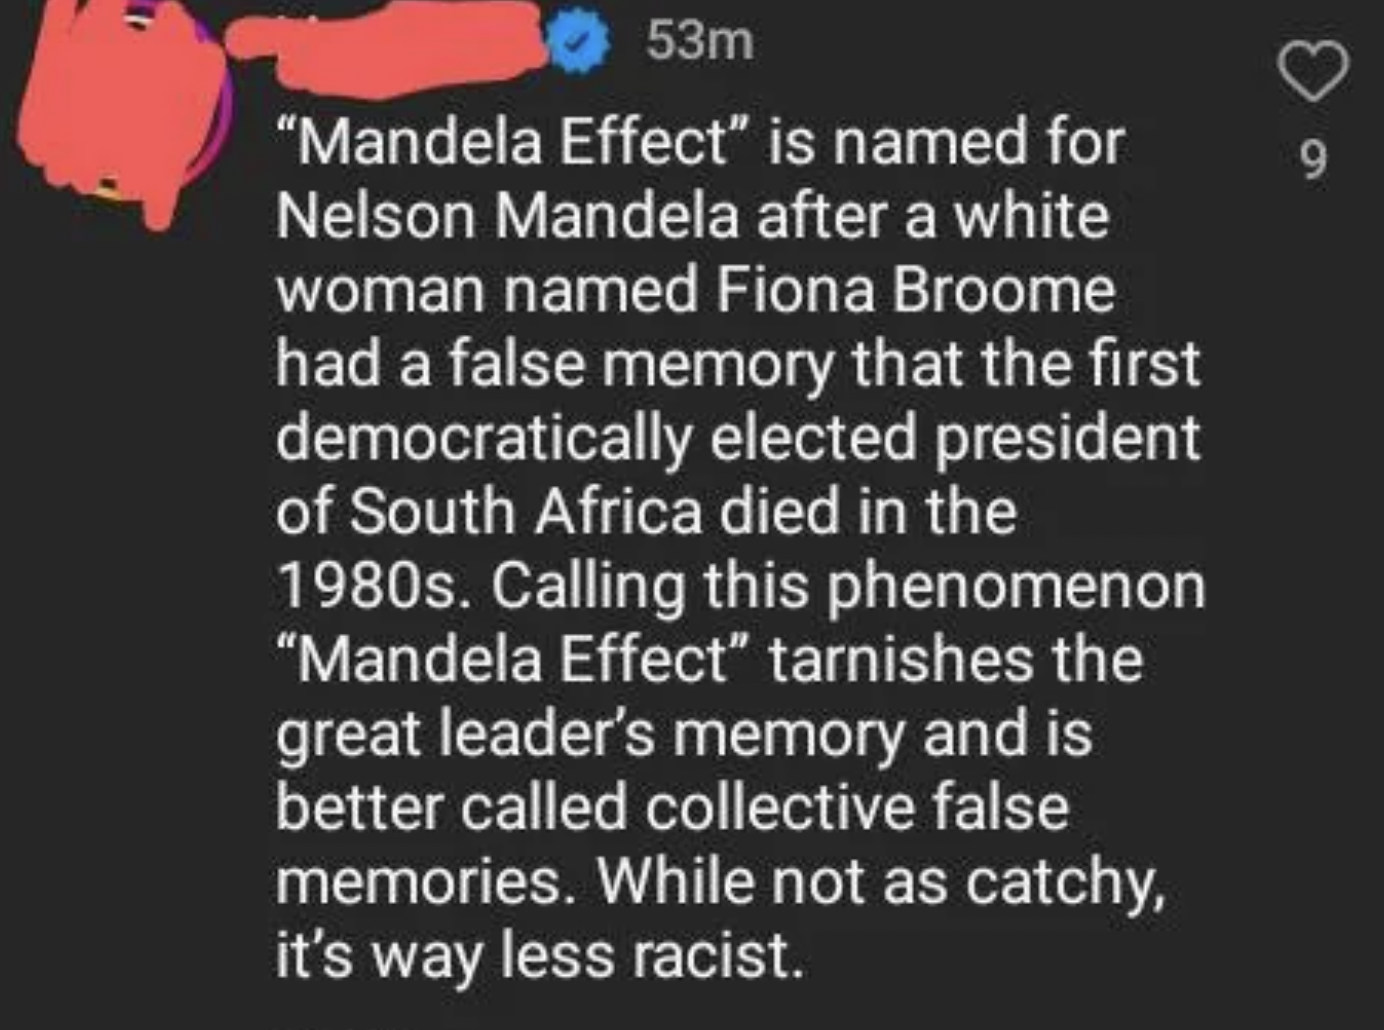 screenshot - 53m "Mandela Effect" is named for Nelson Mandela after a white woman named Fiona Broome had a false memory that the first democratically elected president of South Africa died in the 1980s. Calling this phenomenon "Mandela Effect" tarnishes t